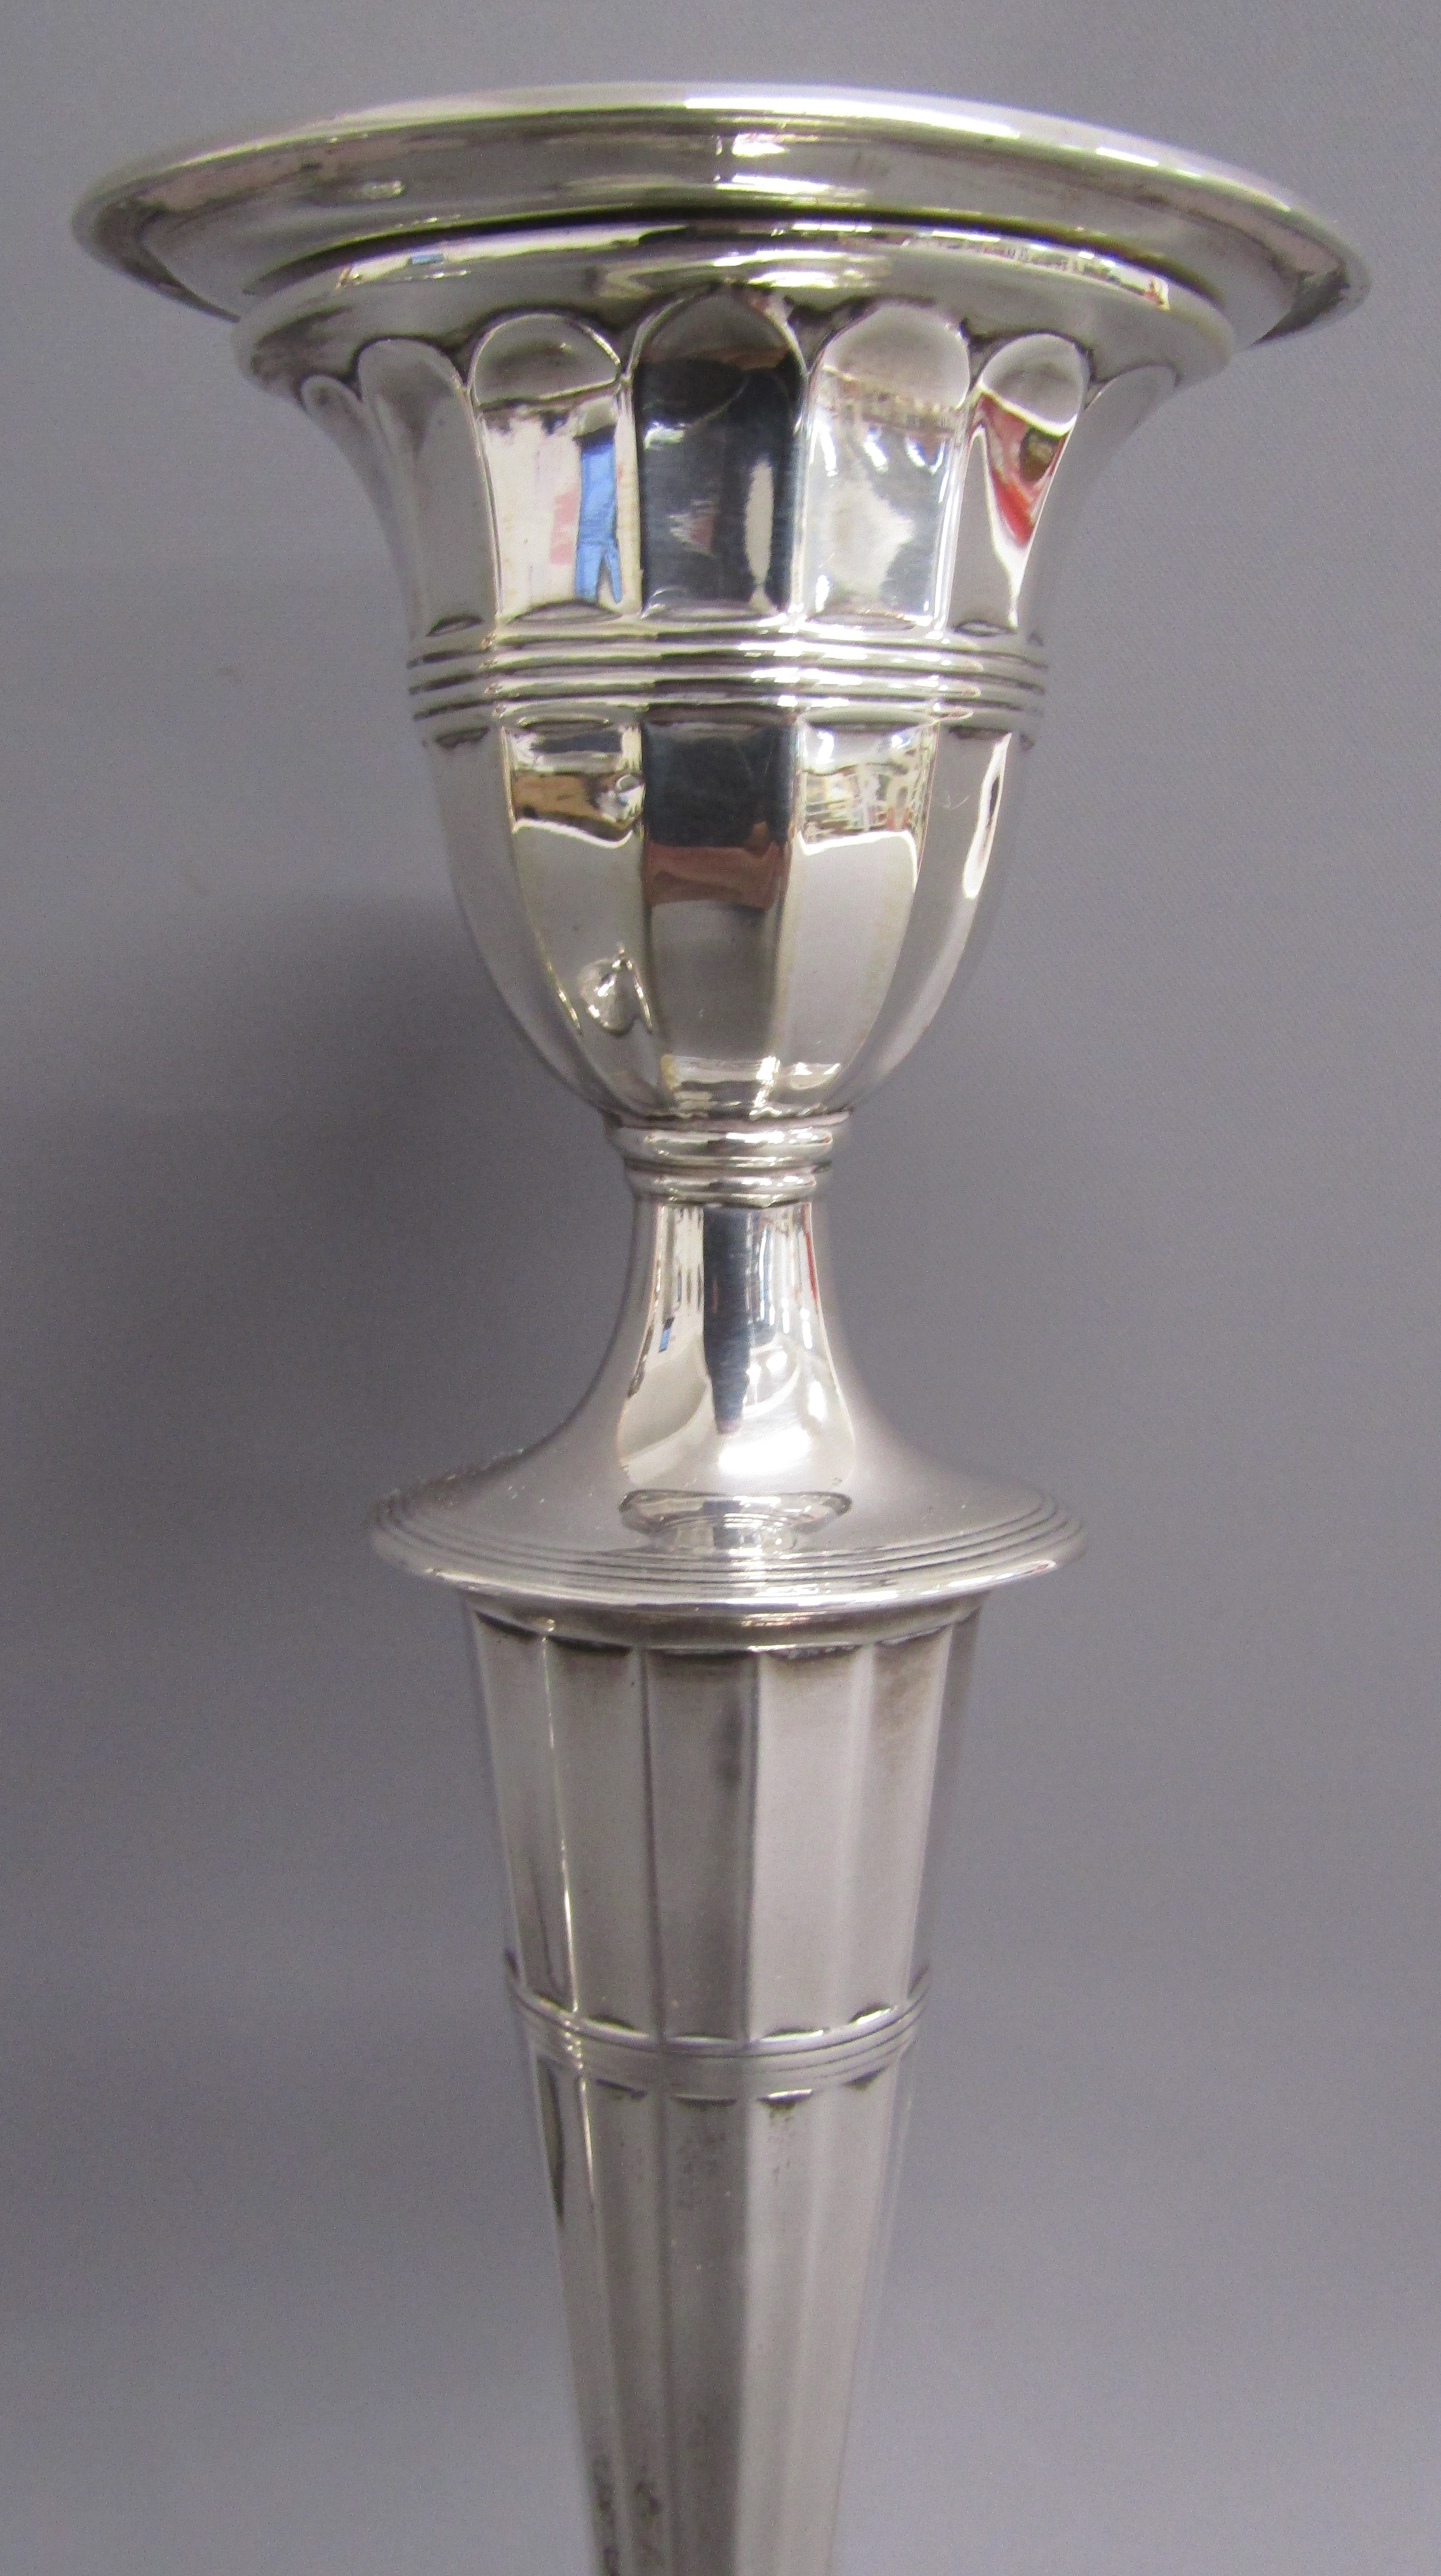 Pair of Hawksworth, Eyre & co, Sheffield 1898 weighted silver candle sticks - approx. 12cm tall - Image 2 of 6